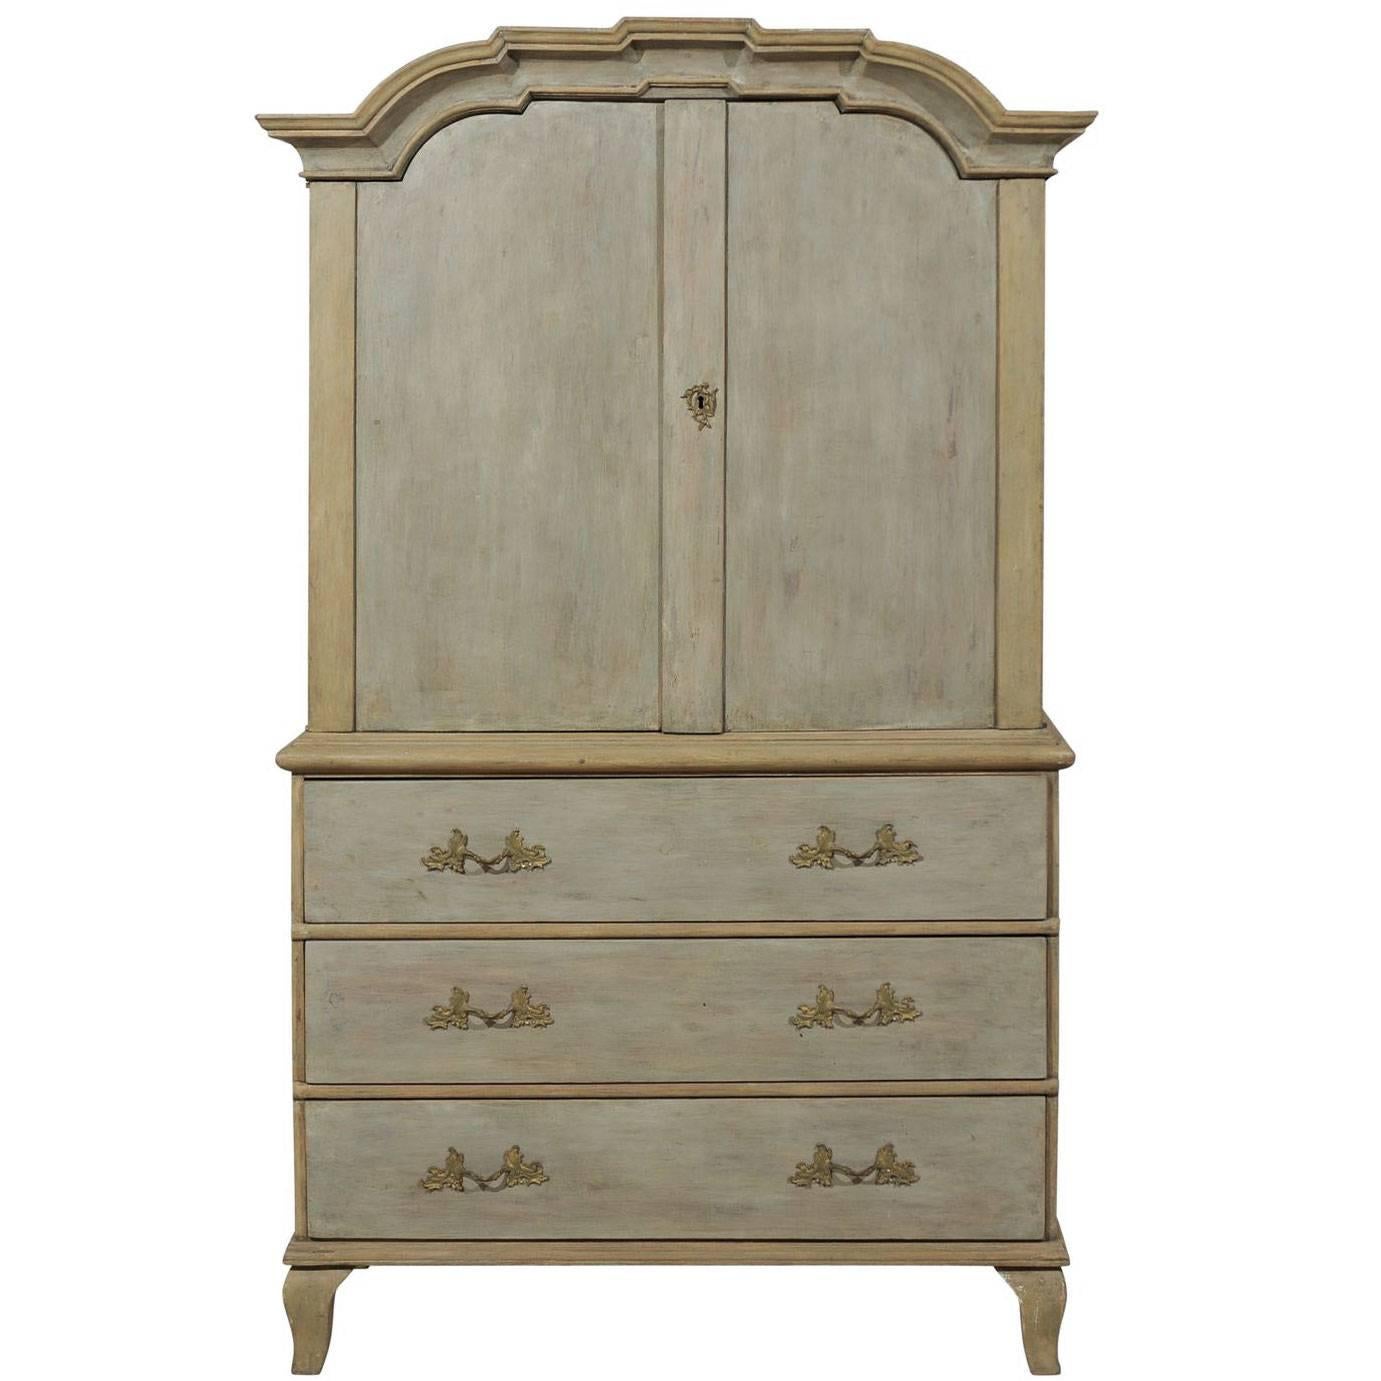 A Swedish Period Rococo 18th Century Painted Wood Linen Press Cabinet